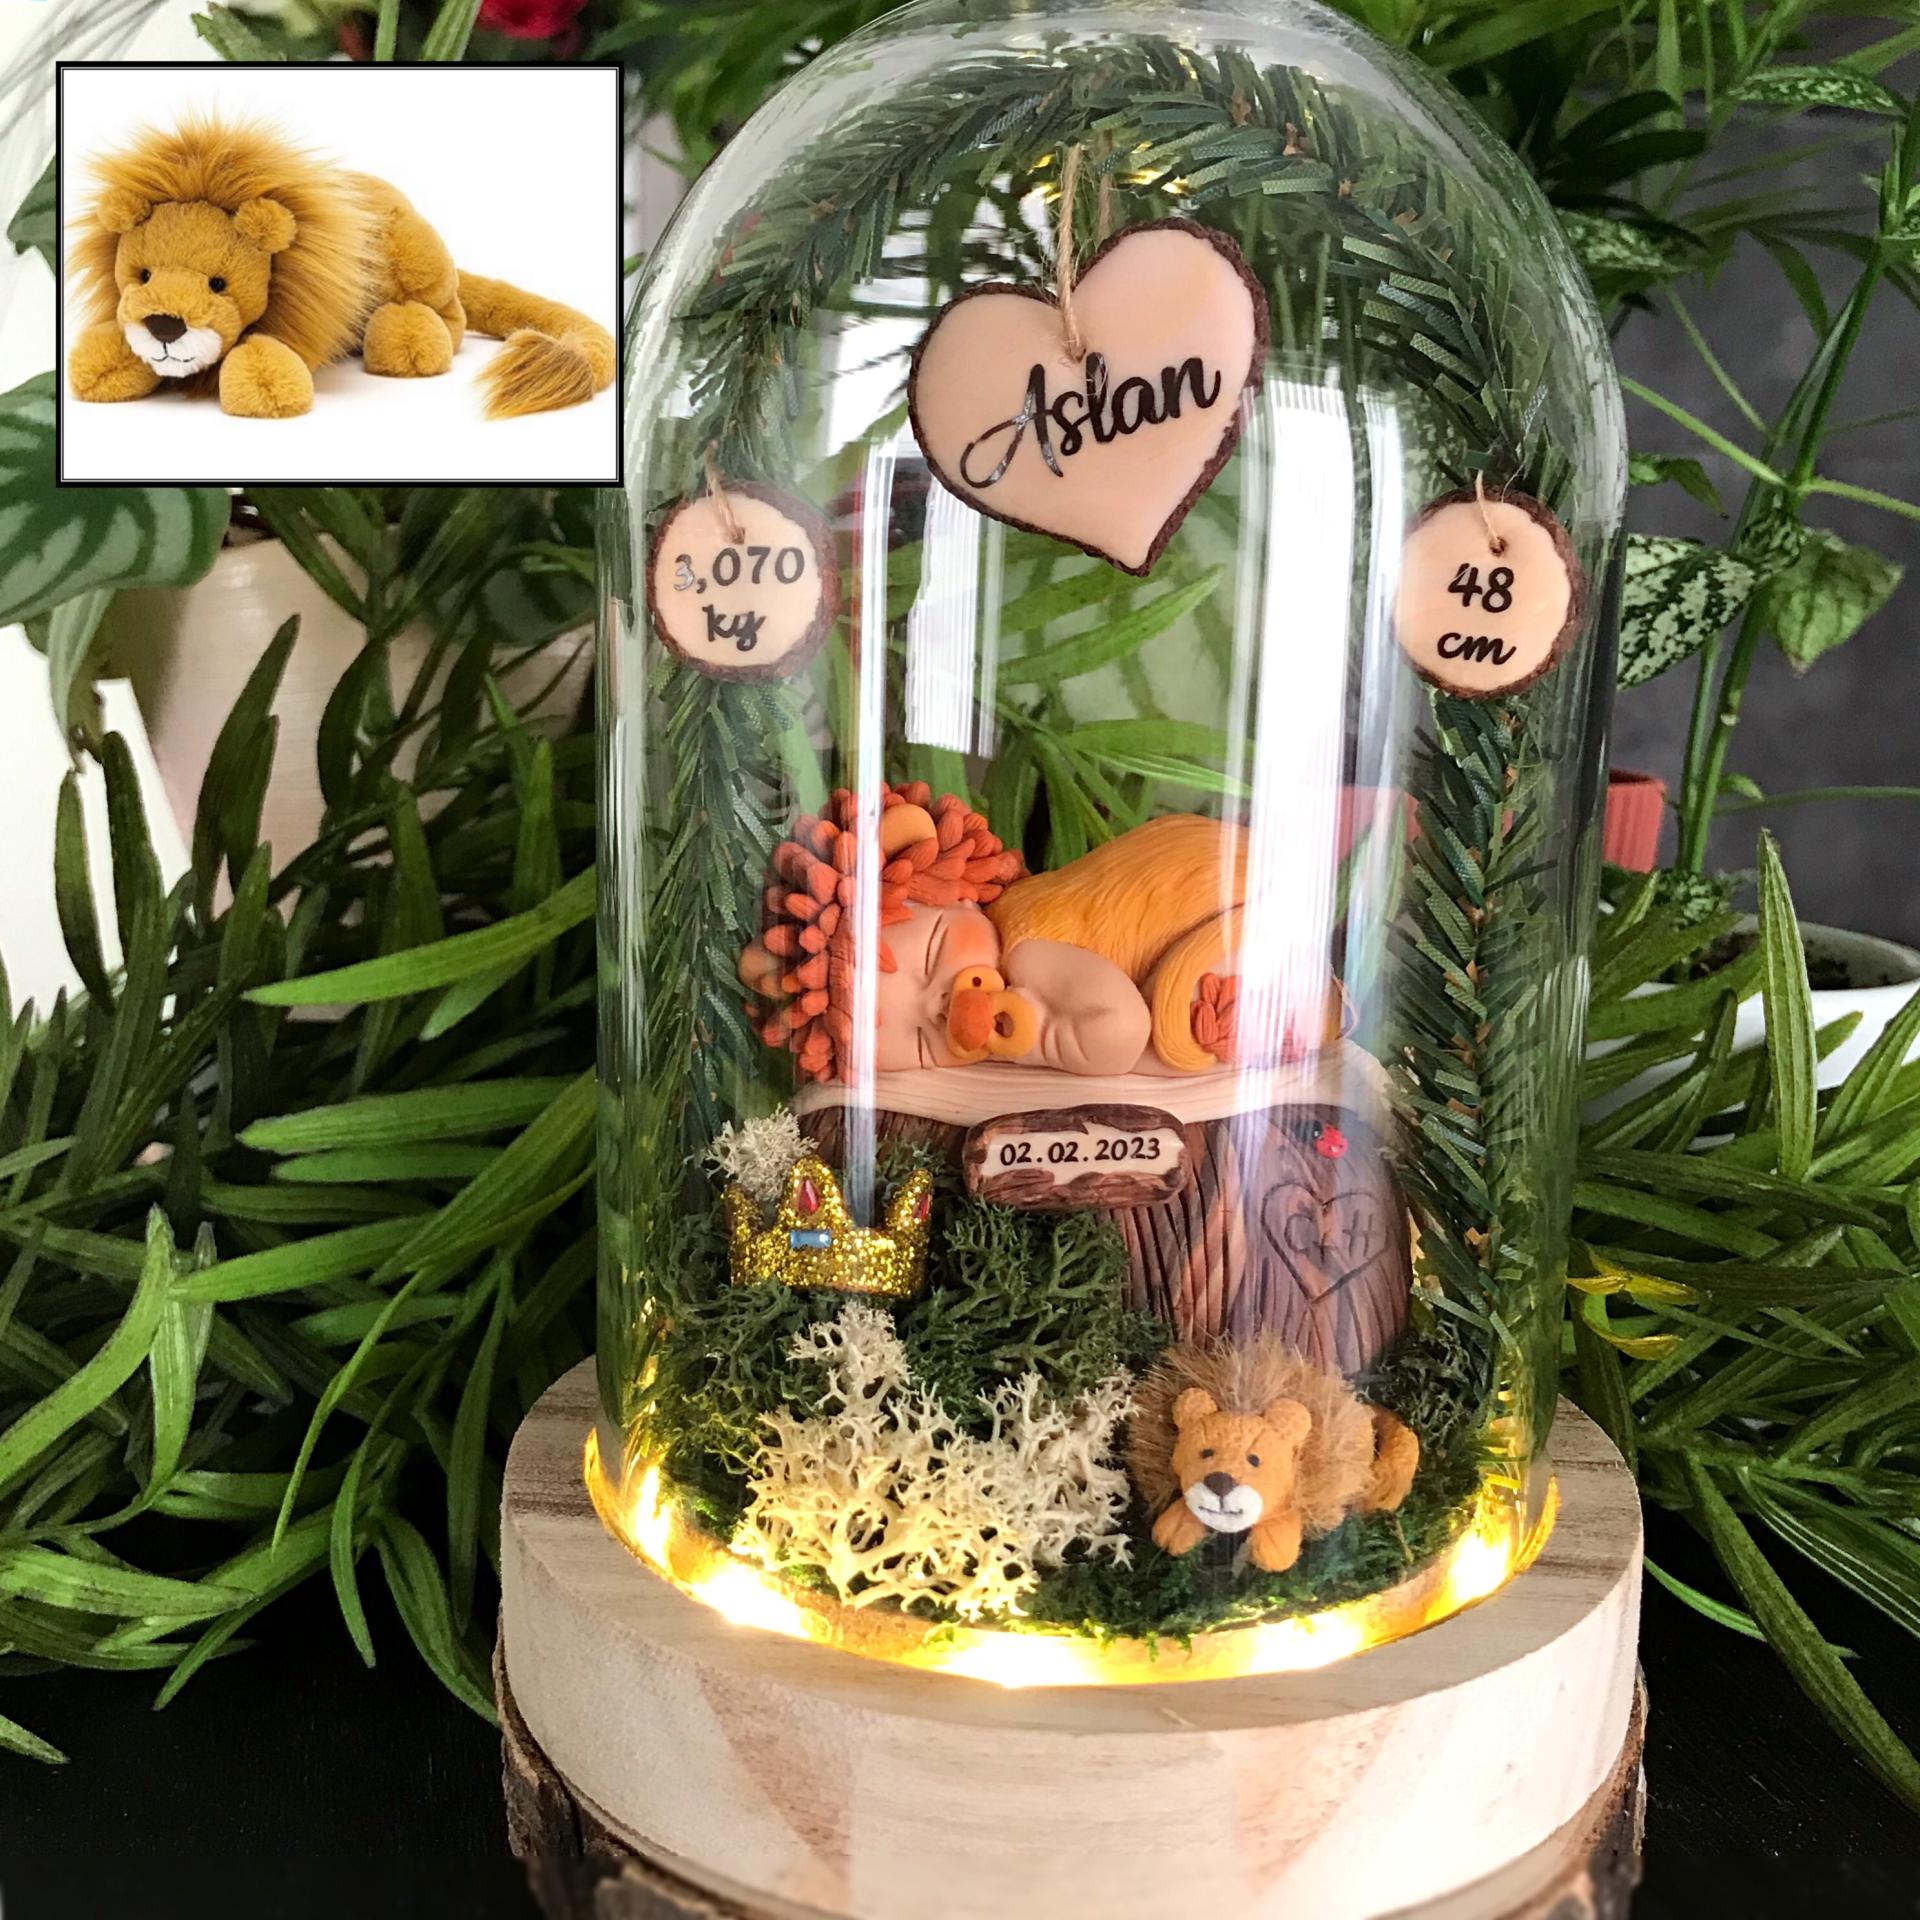 Handcrafted nightlight under a glass bell, baby lion in Fimo, in an enchanted forest matching the doudou